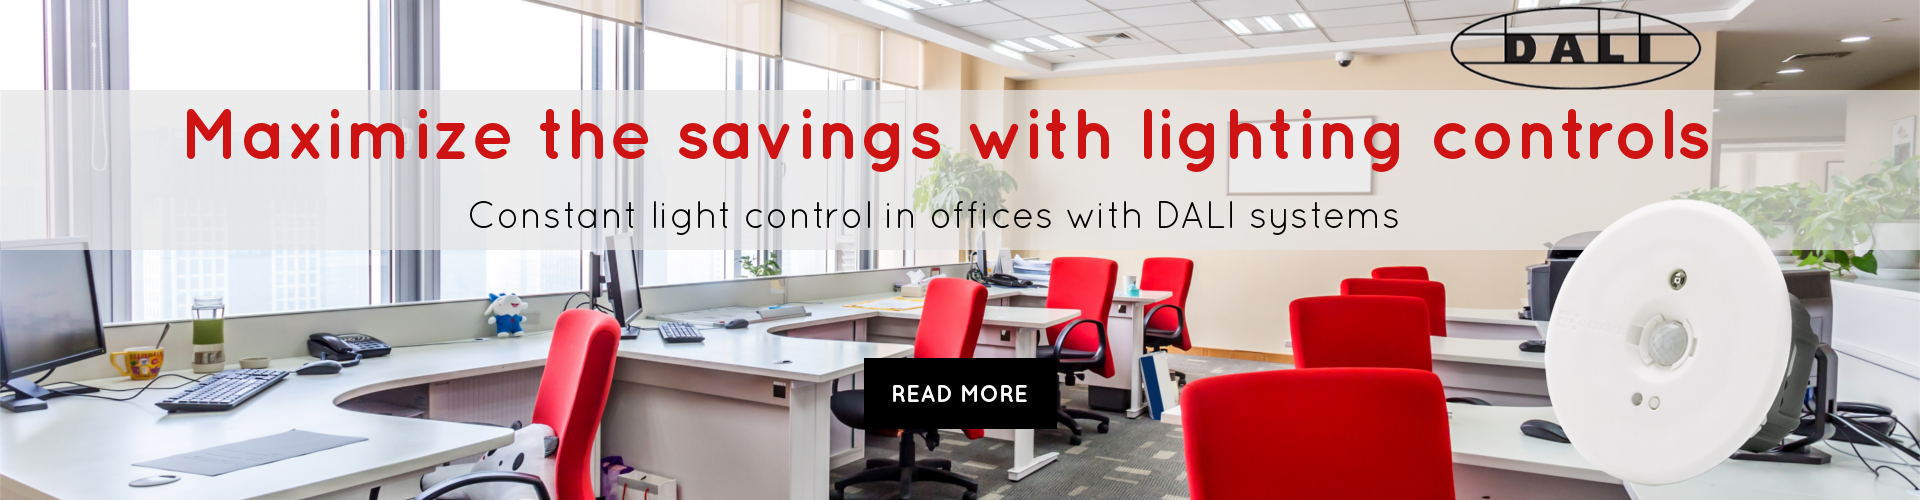 Maximize the savings with lighting controls constant light control in offices with DALI systems